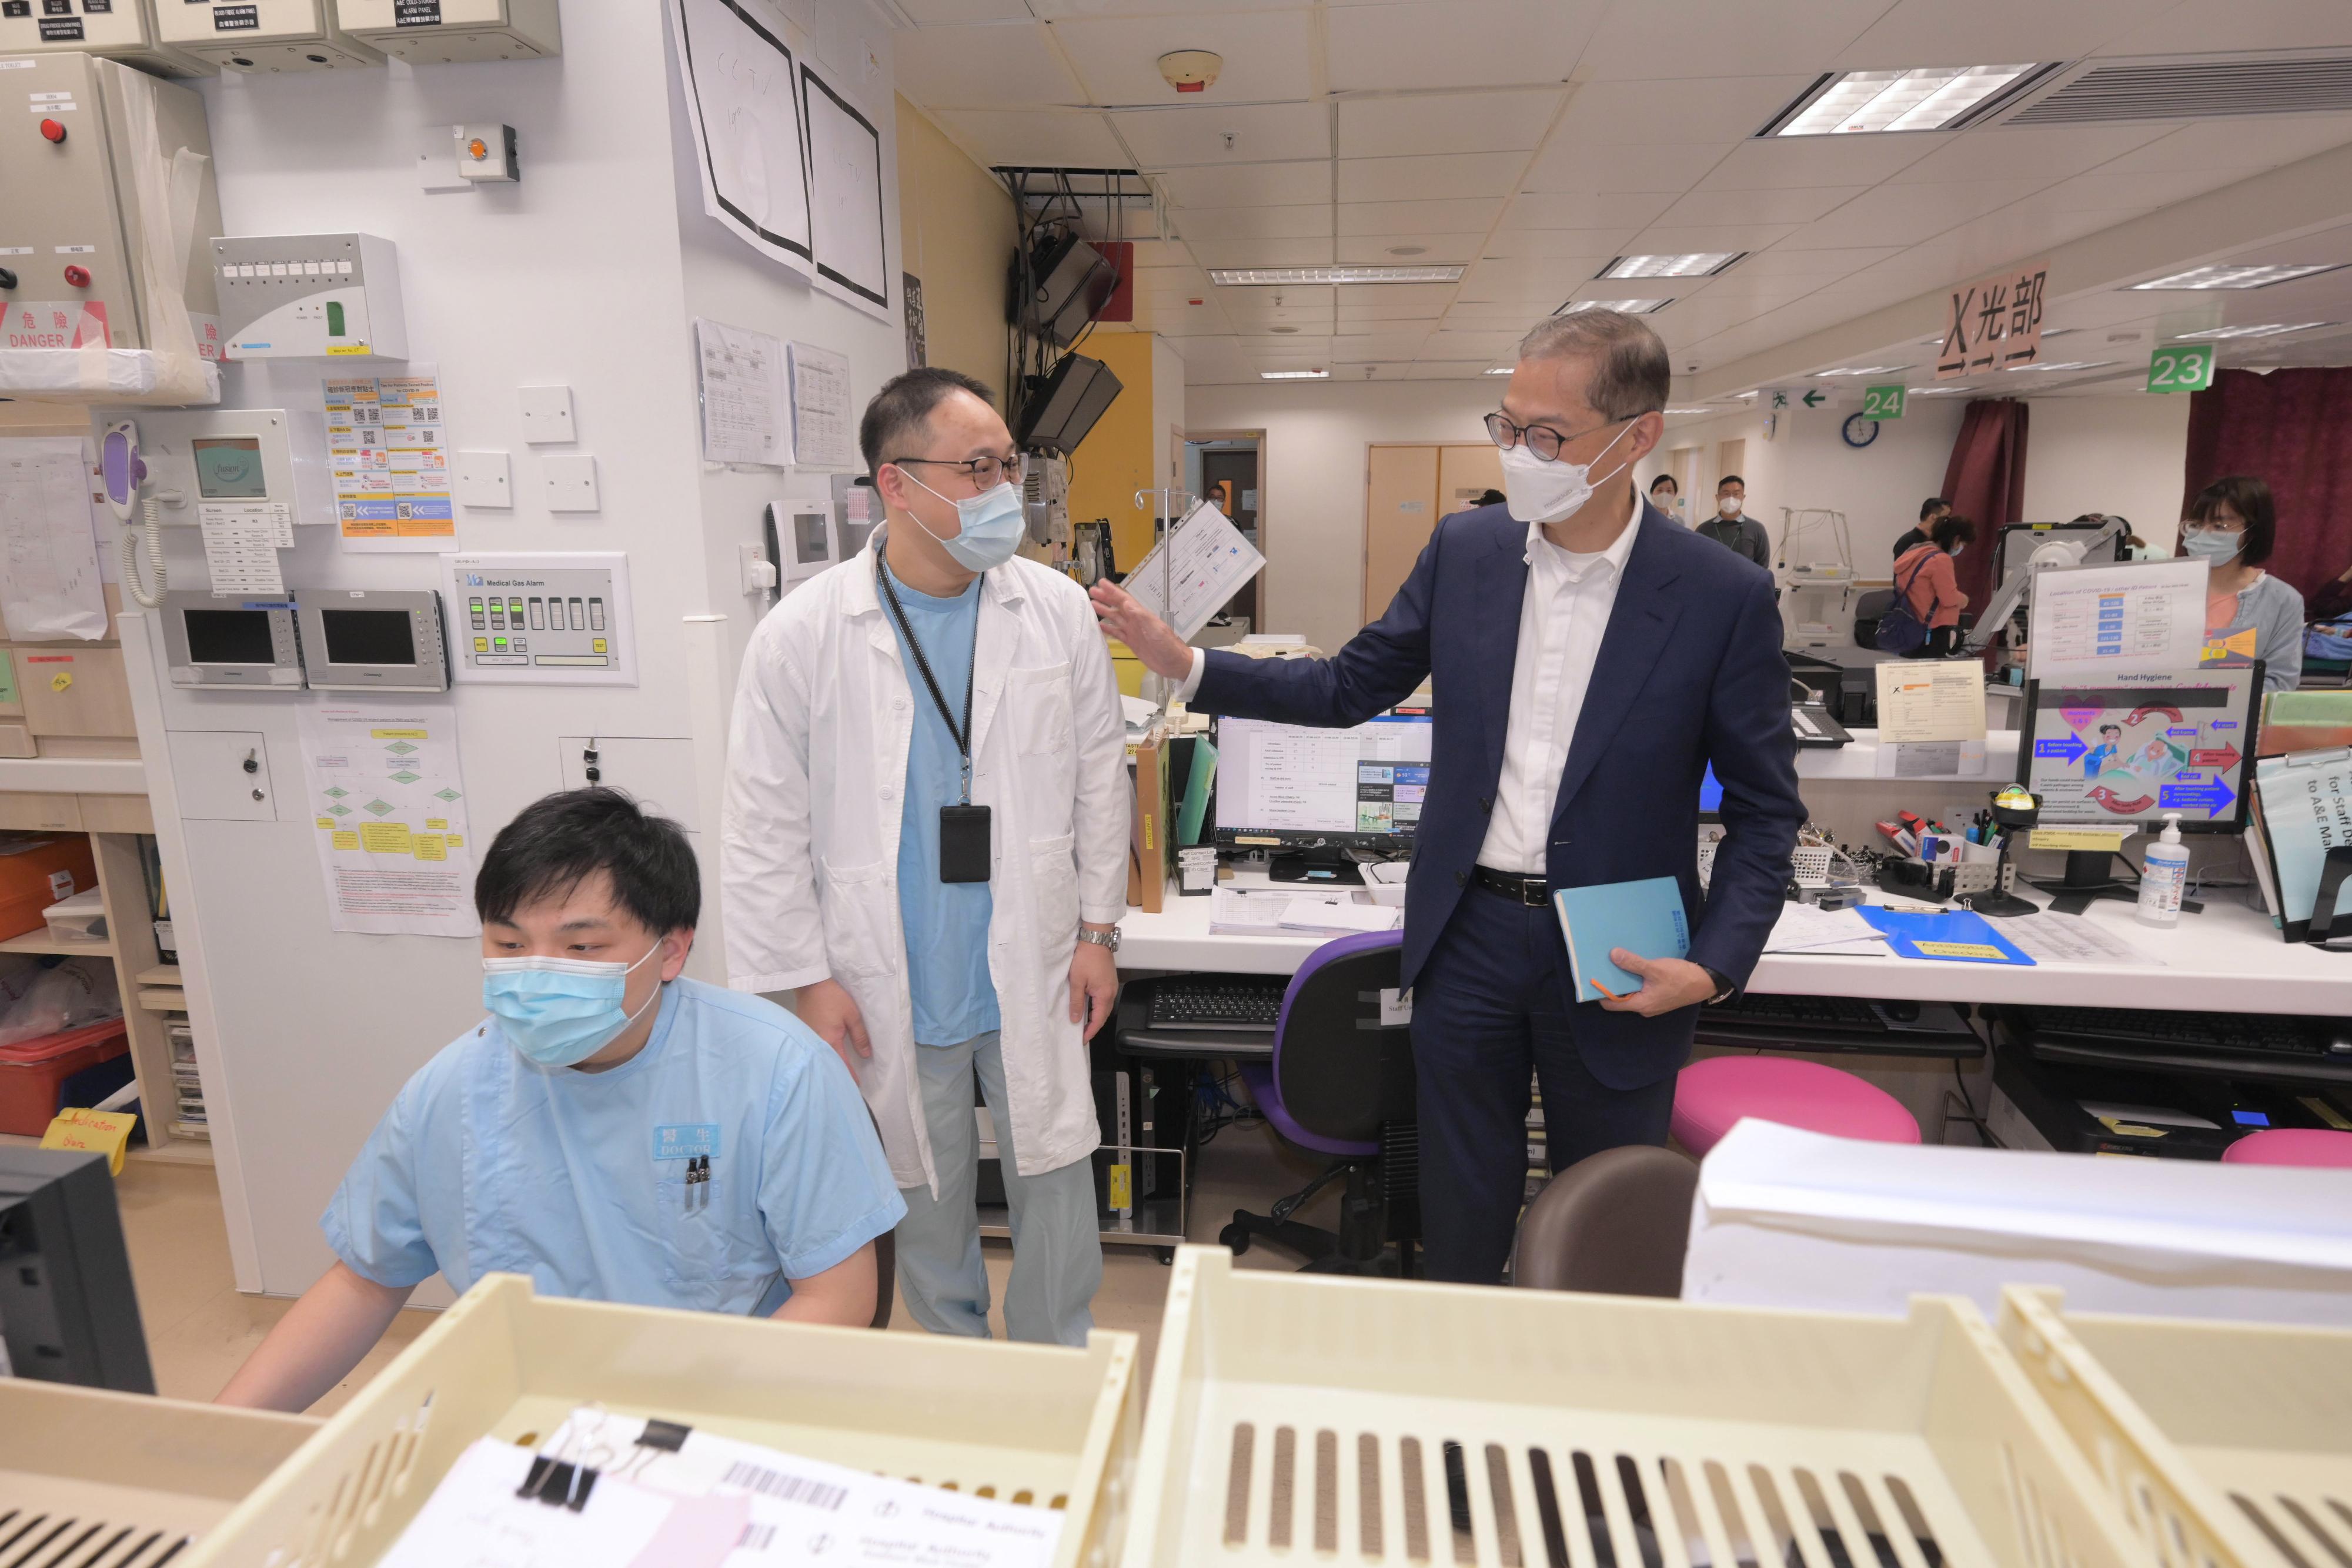 The Secretary for Health, Professor Lo Chung-mau (right), visited Princess Margaret Hospital today (January 20) and showed support for the frontline healthcare staff of the Accident and Emergency Department of the hospital.